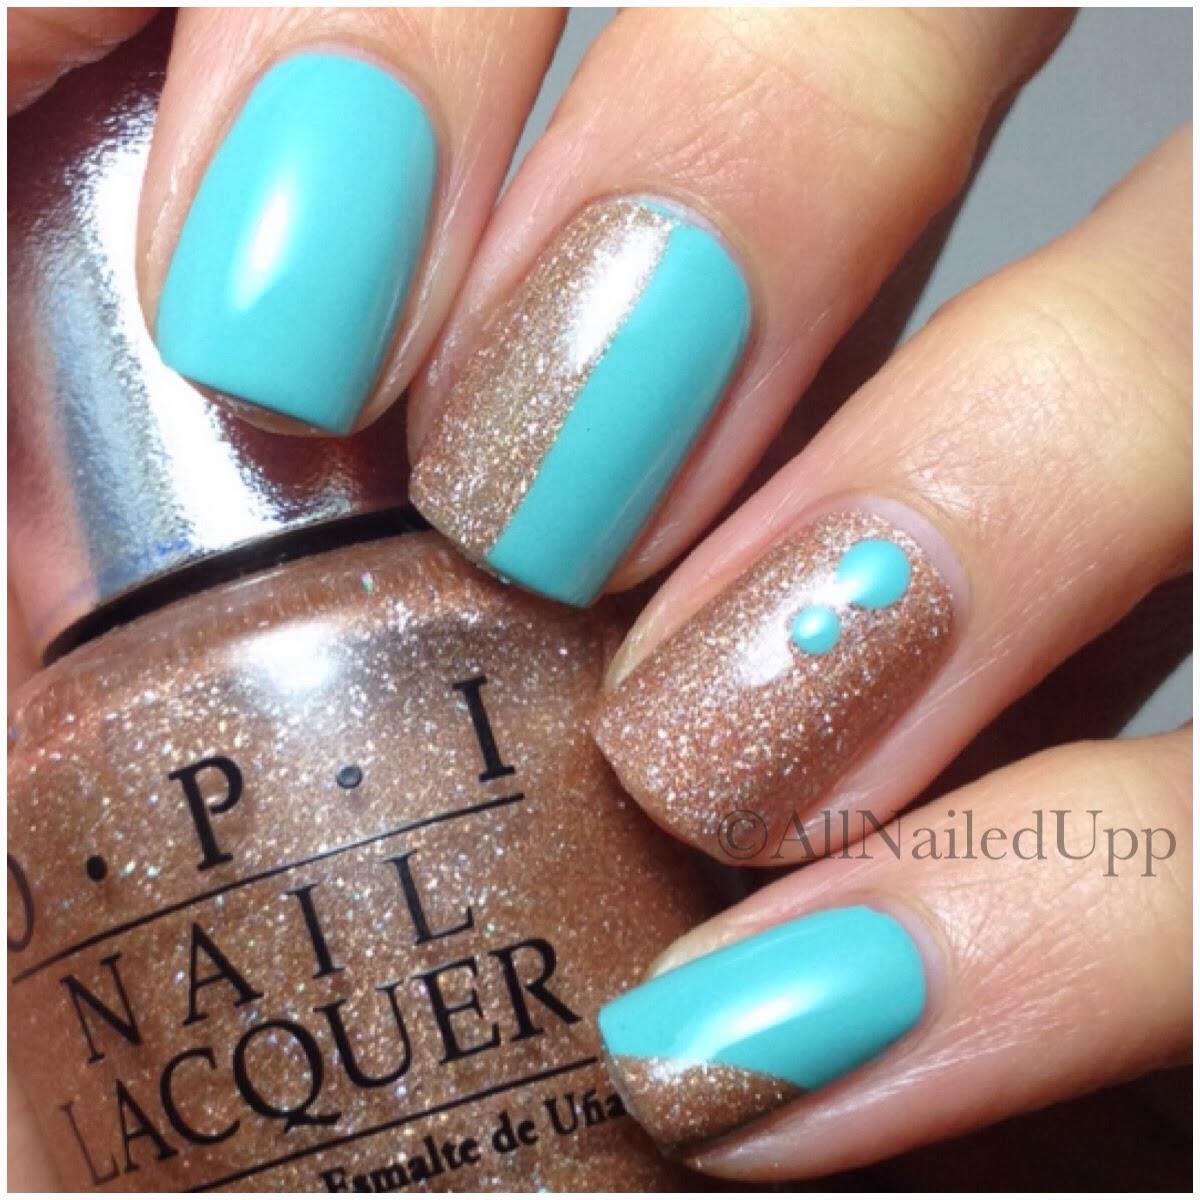 All Nailed Up: Gold & Turquoise